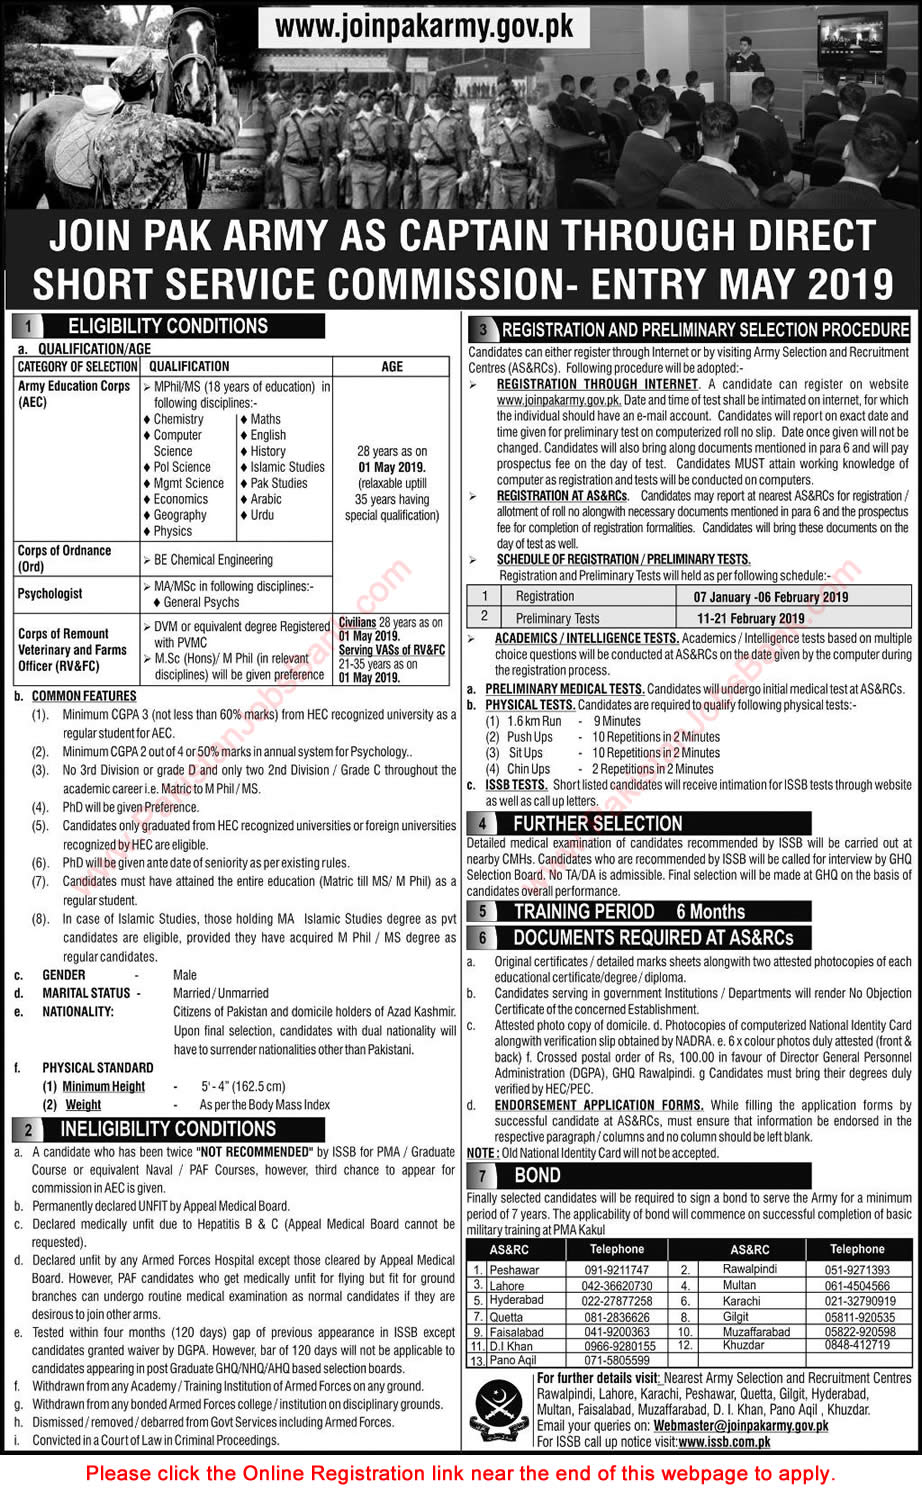 Join Pakistan Army as Captain 2019 through Direct Short Service Commission Online Registration Latest